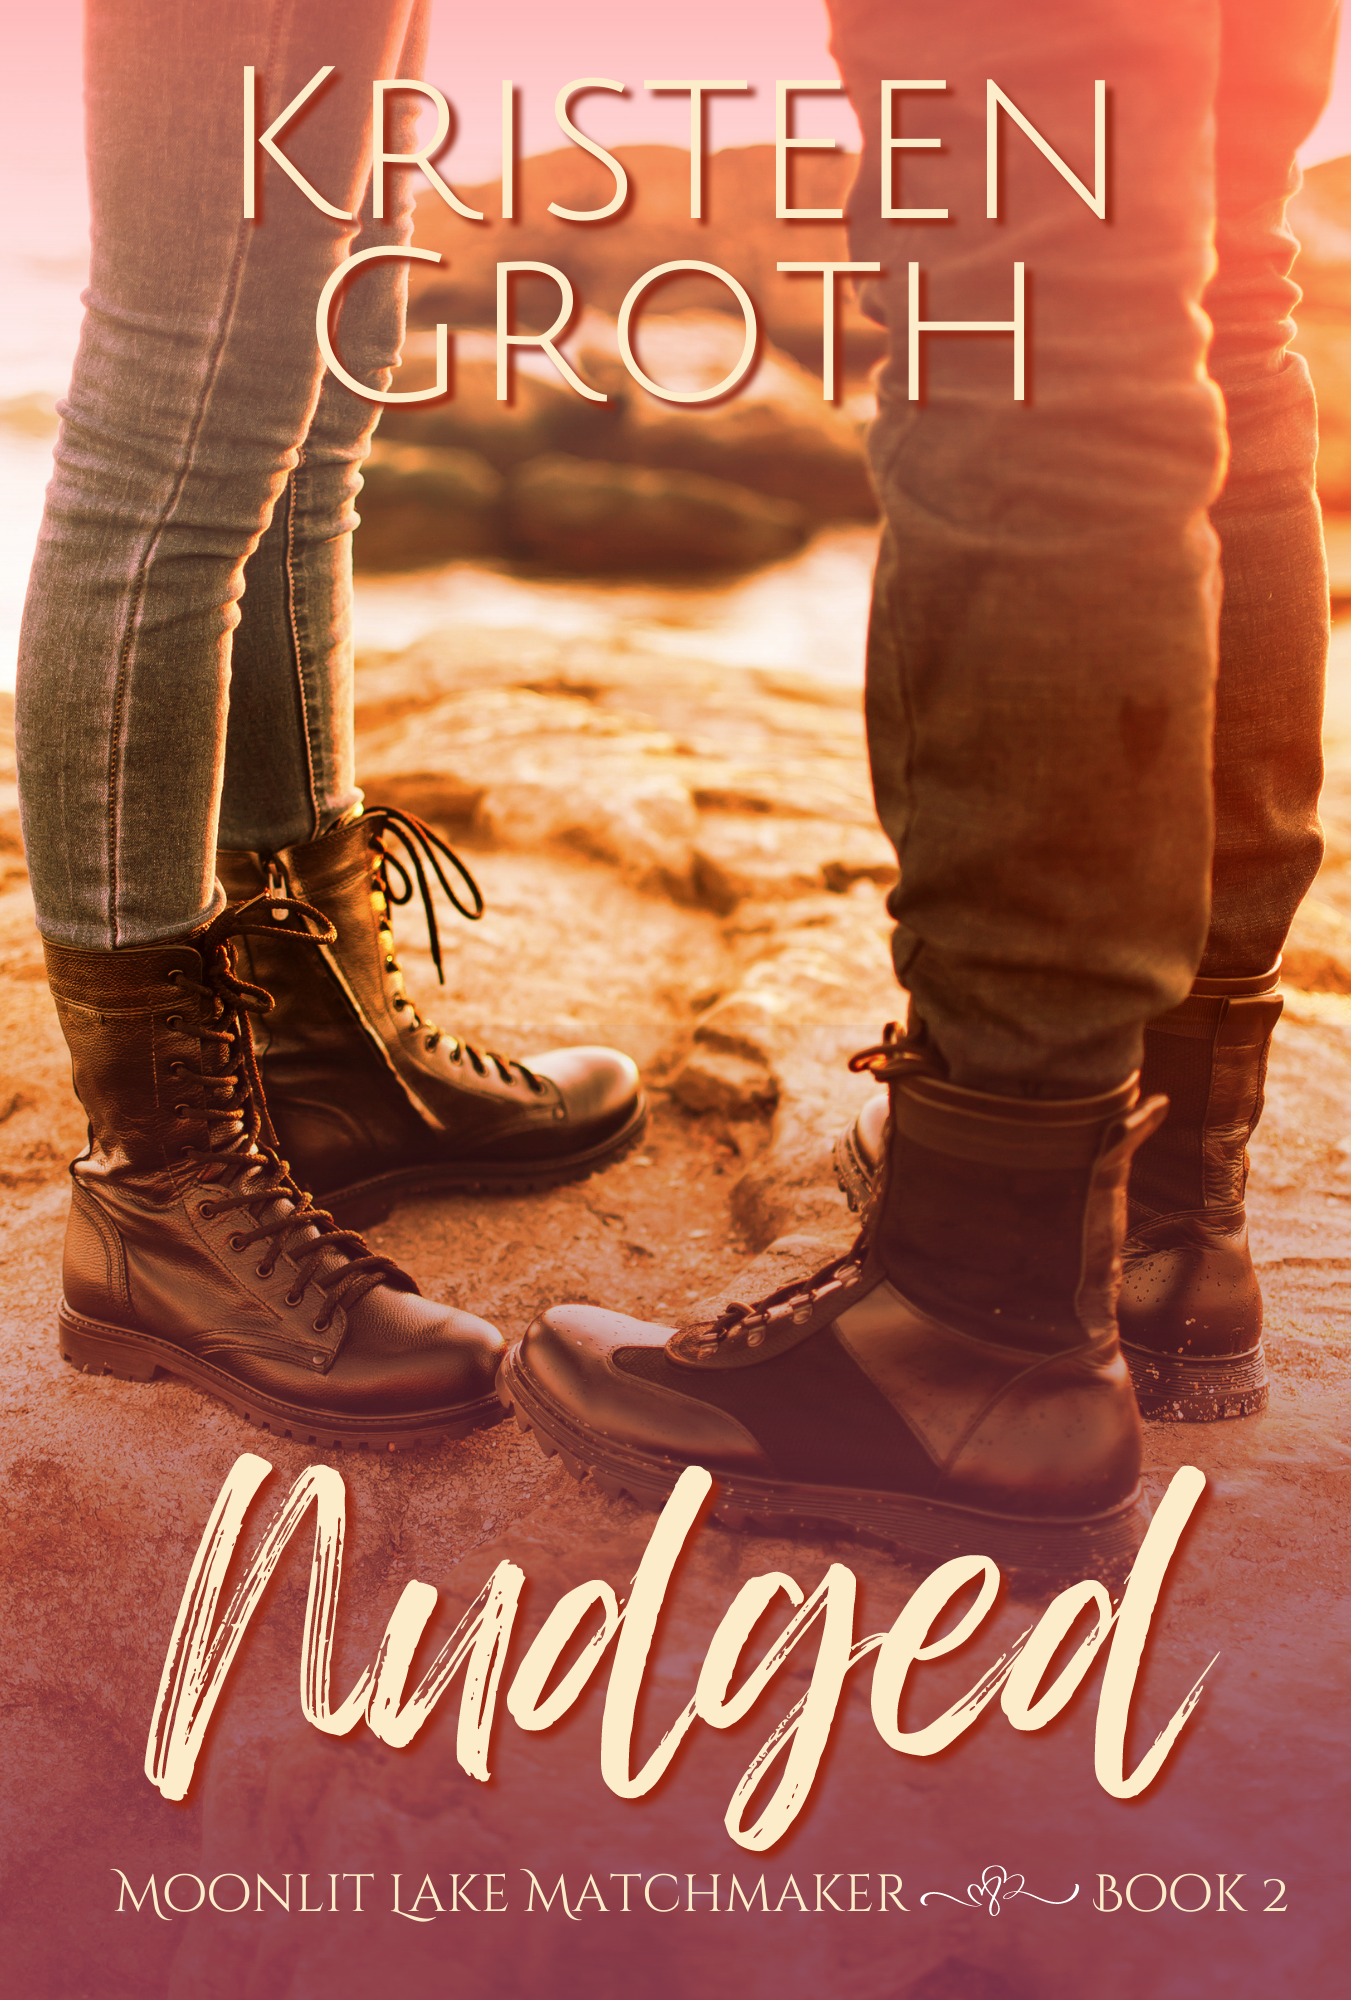 Nudged by kristeen groth